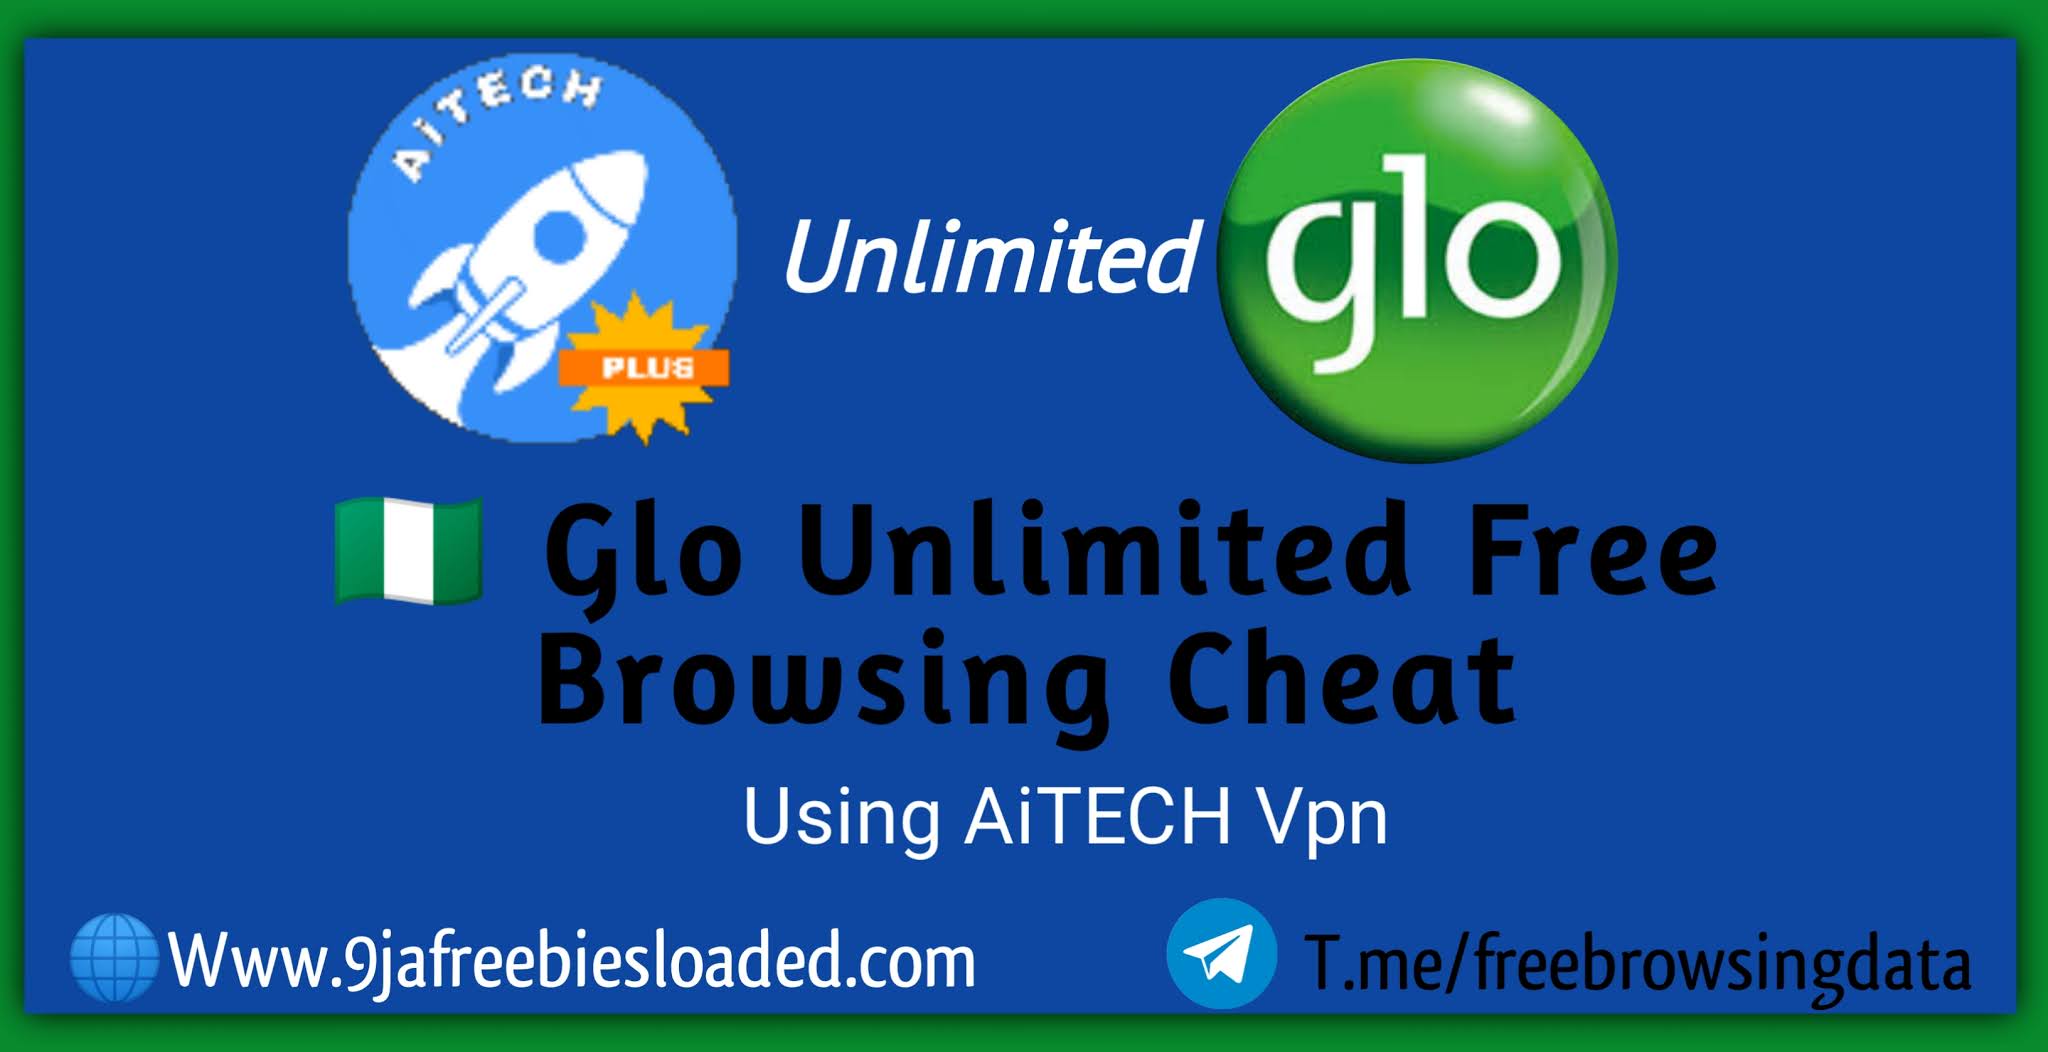 Glo Unlimited Free Browsing Cheat Powered With AiTECH VPN - August